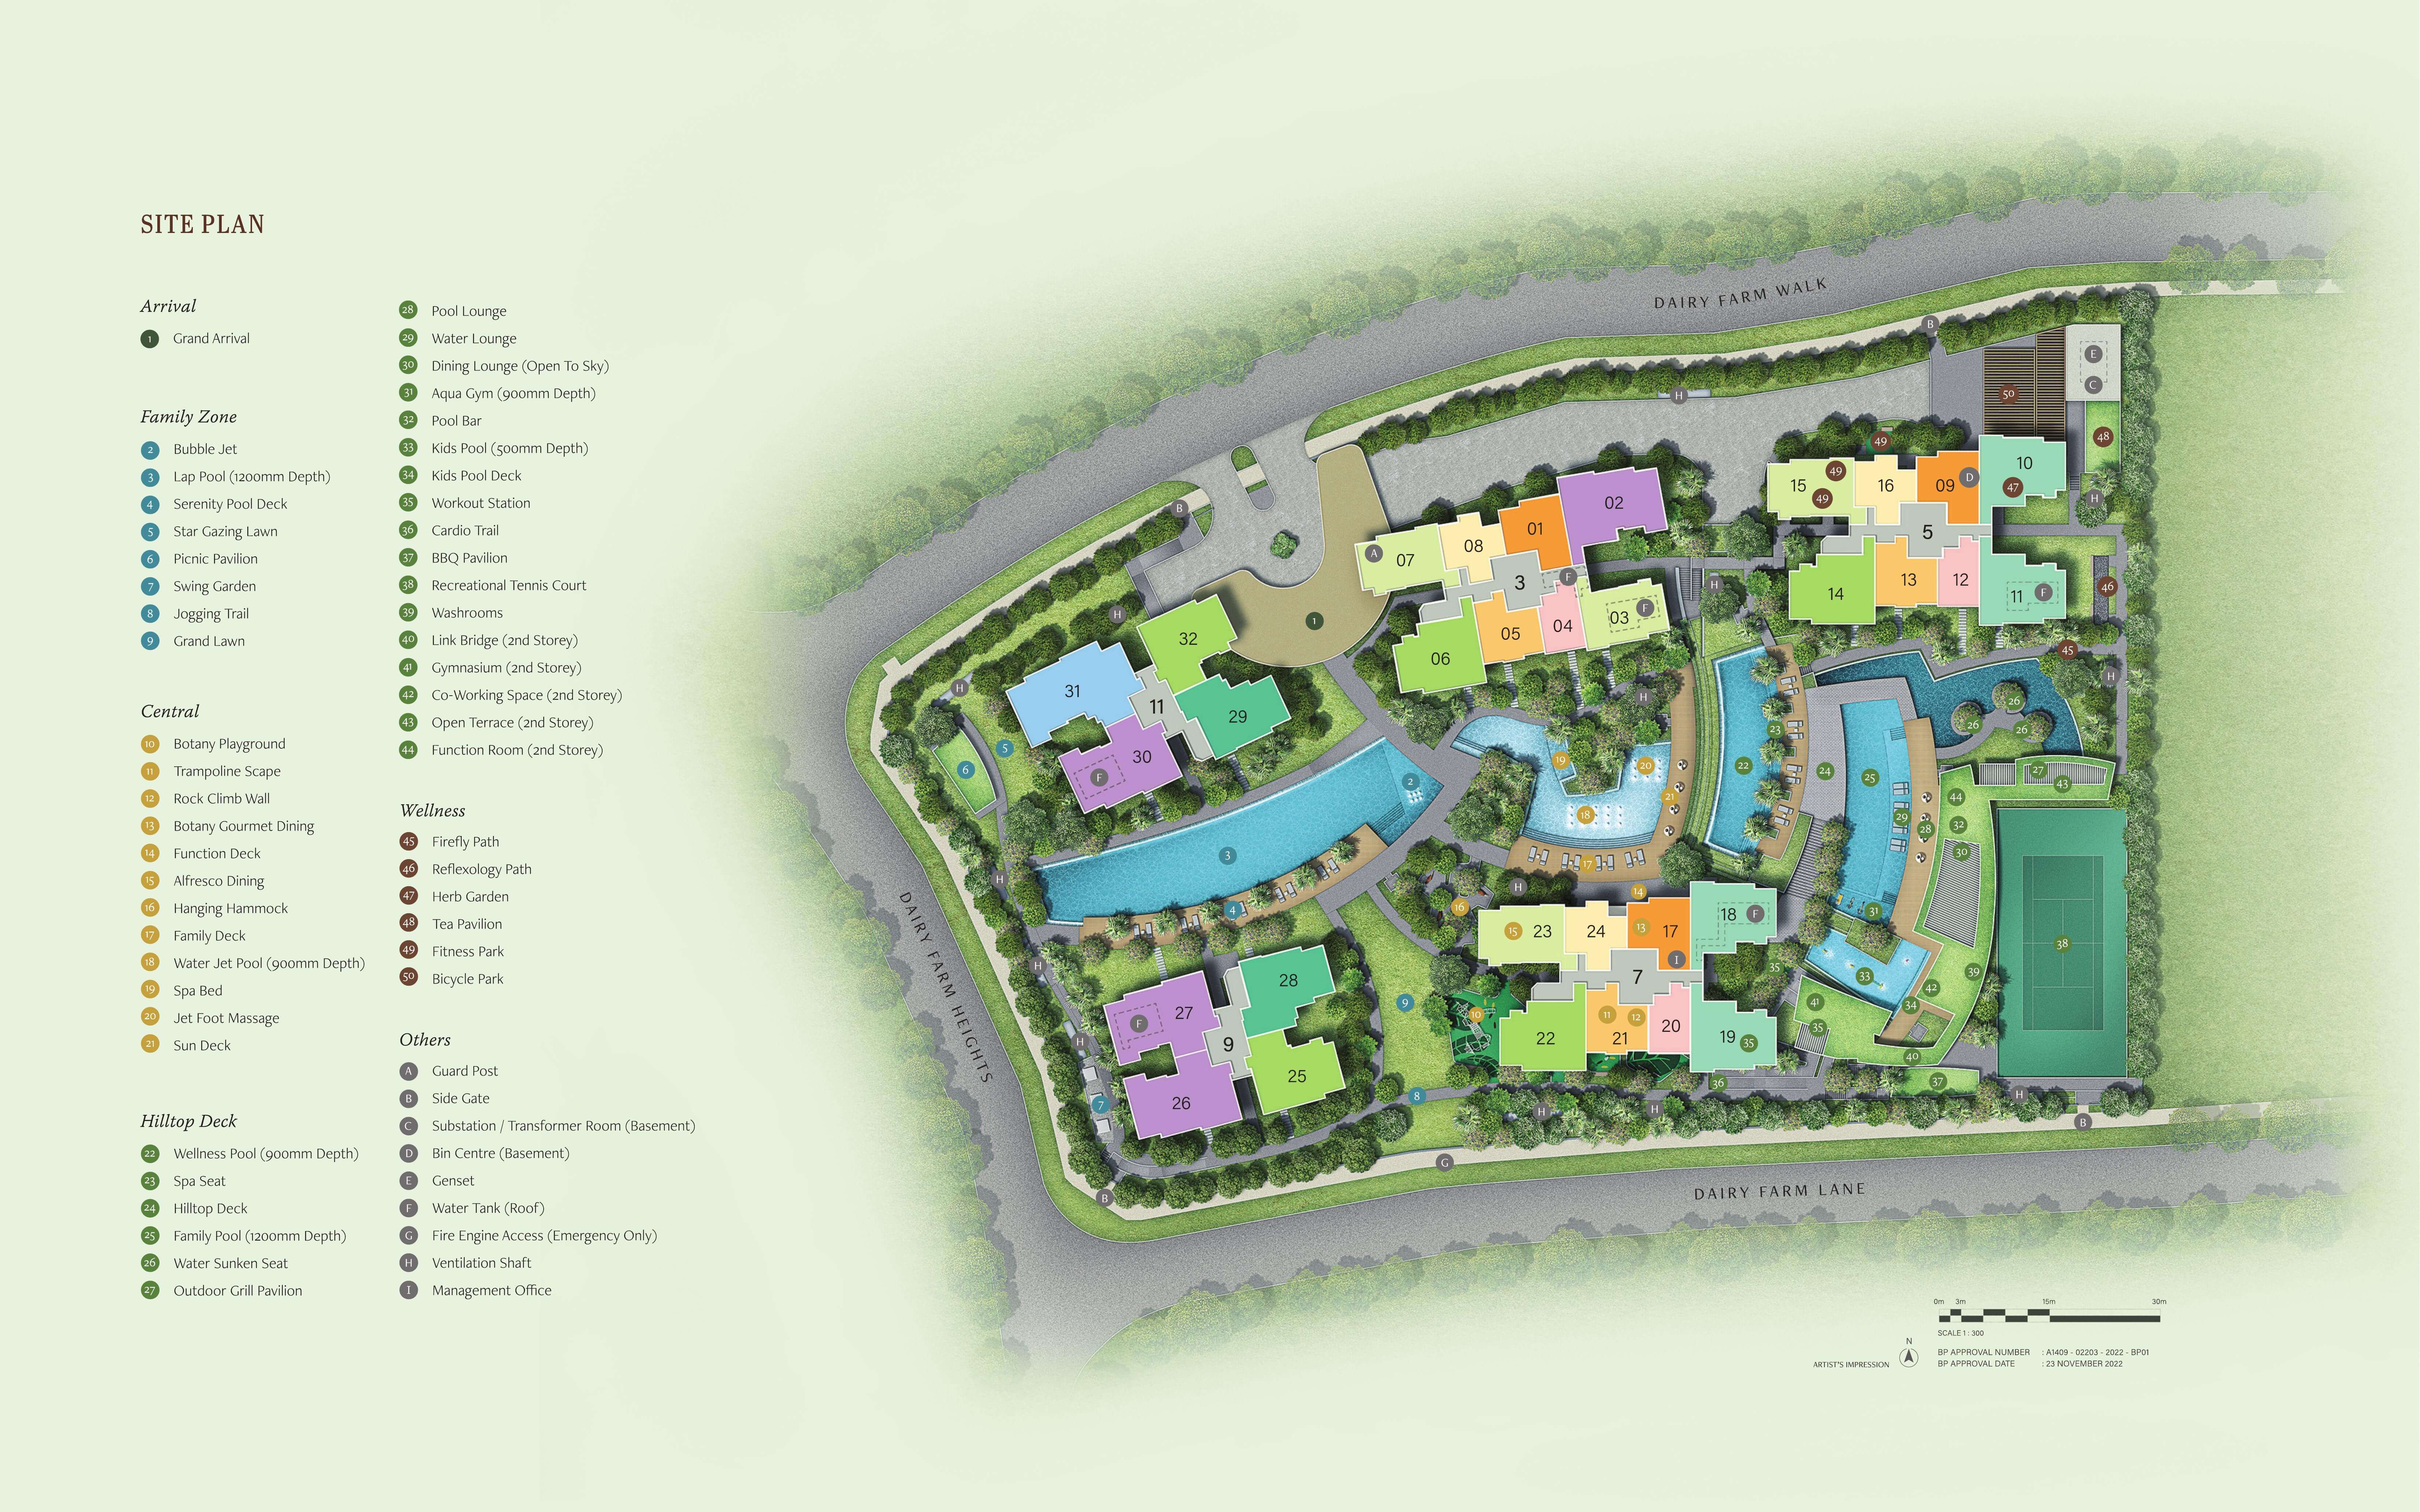 The Botany Site Plan